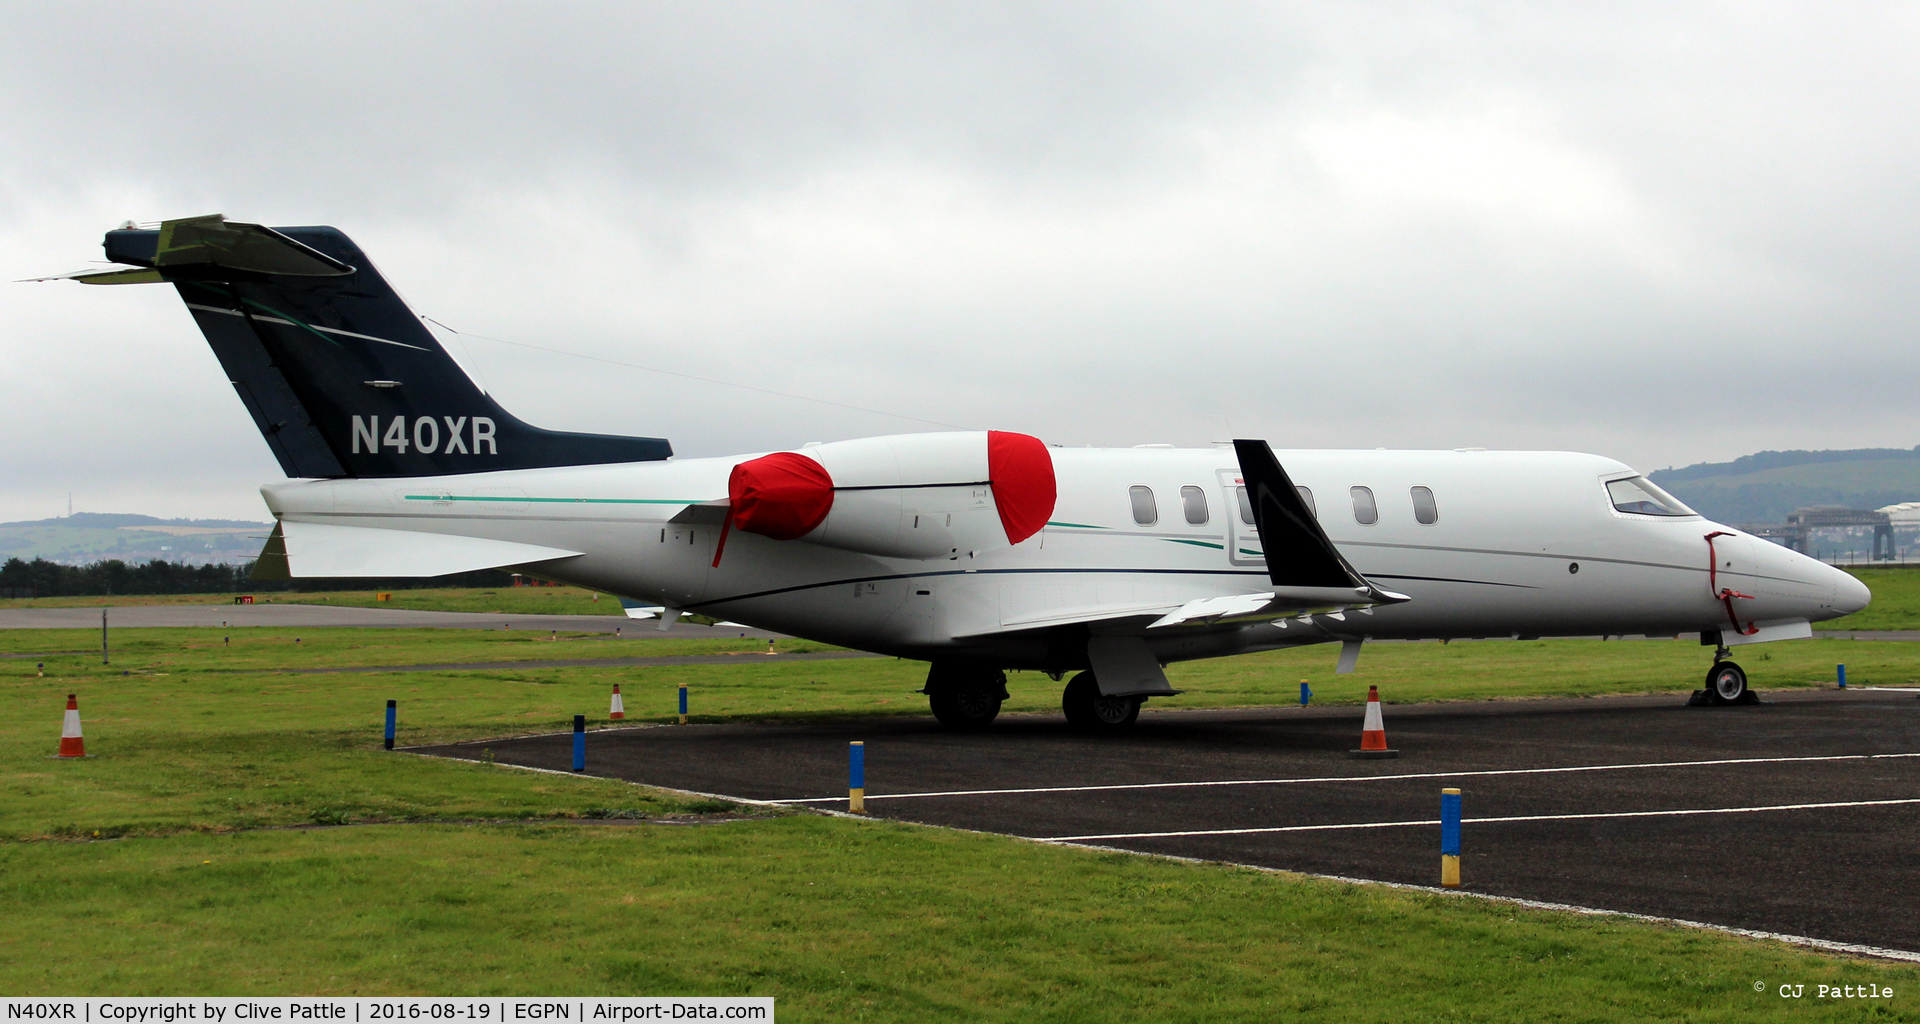 N40XR, 2005 Learjet 45 C/N 2028, A welcome visitor to Dundee EGPN